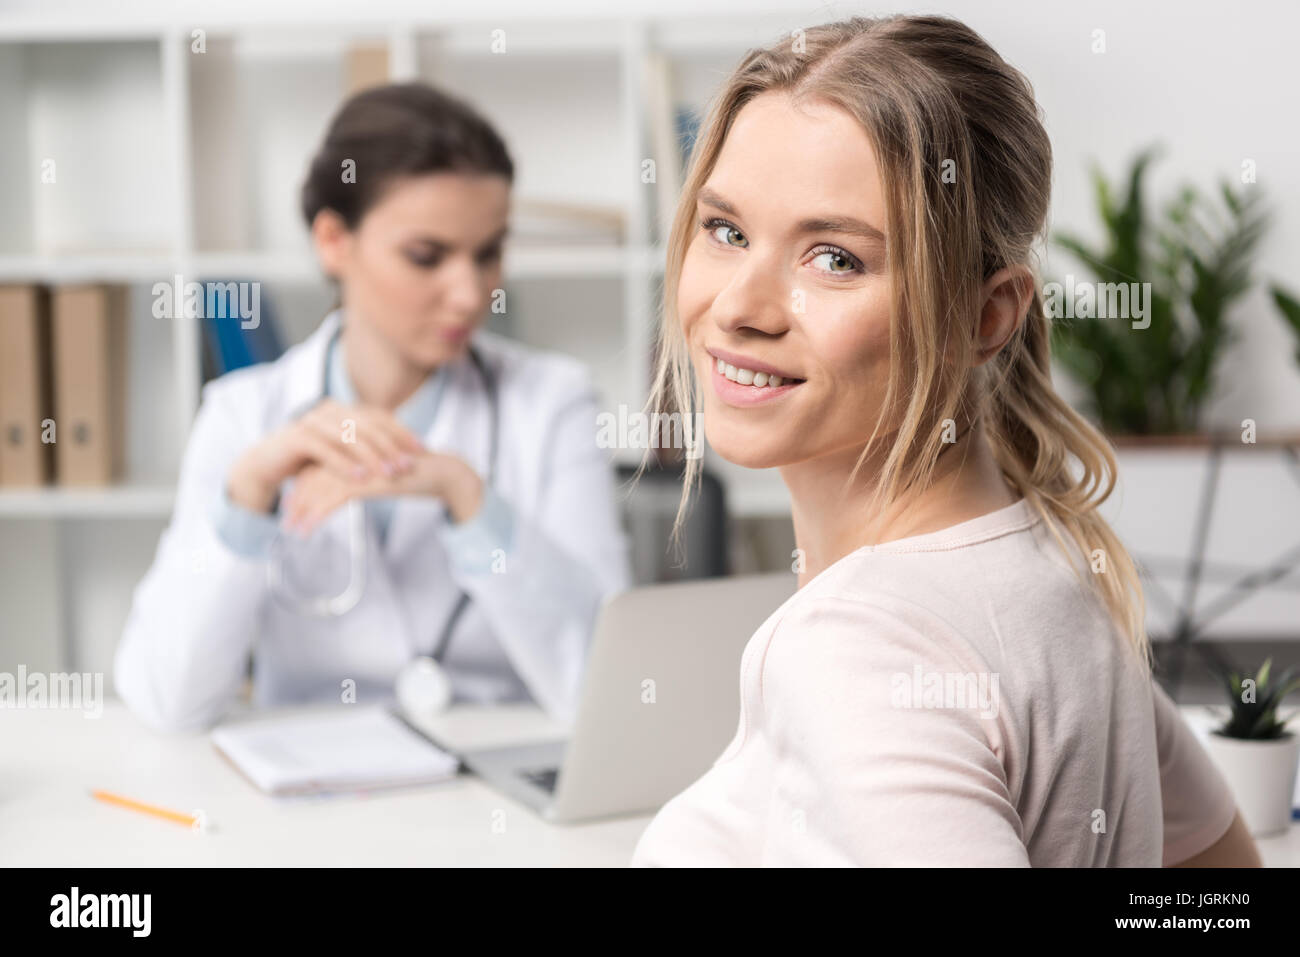 Close-up view of beautiful young patient smiling at camera and doctor using laptop behind Stock Photo